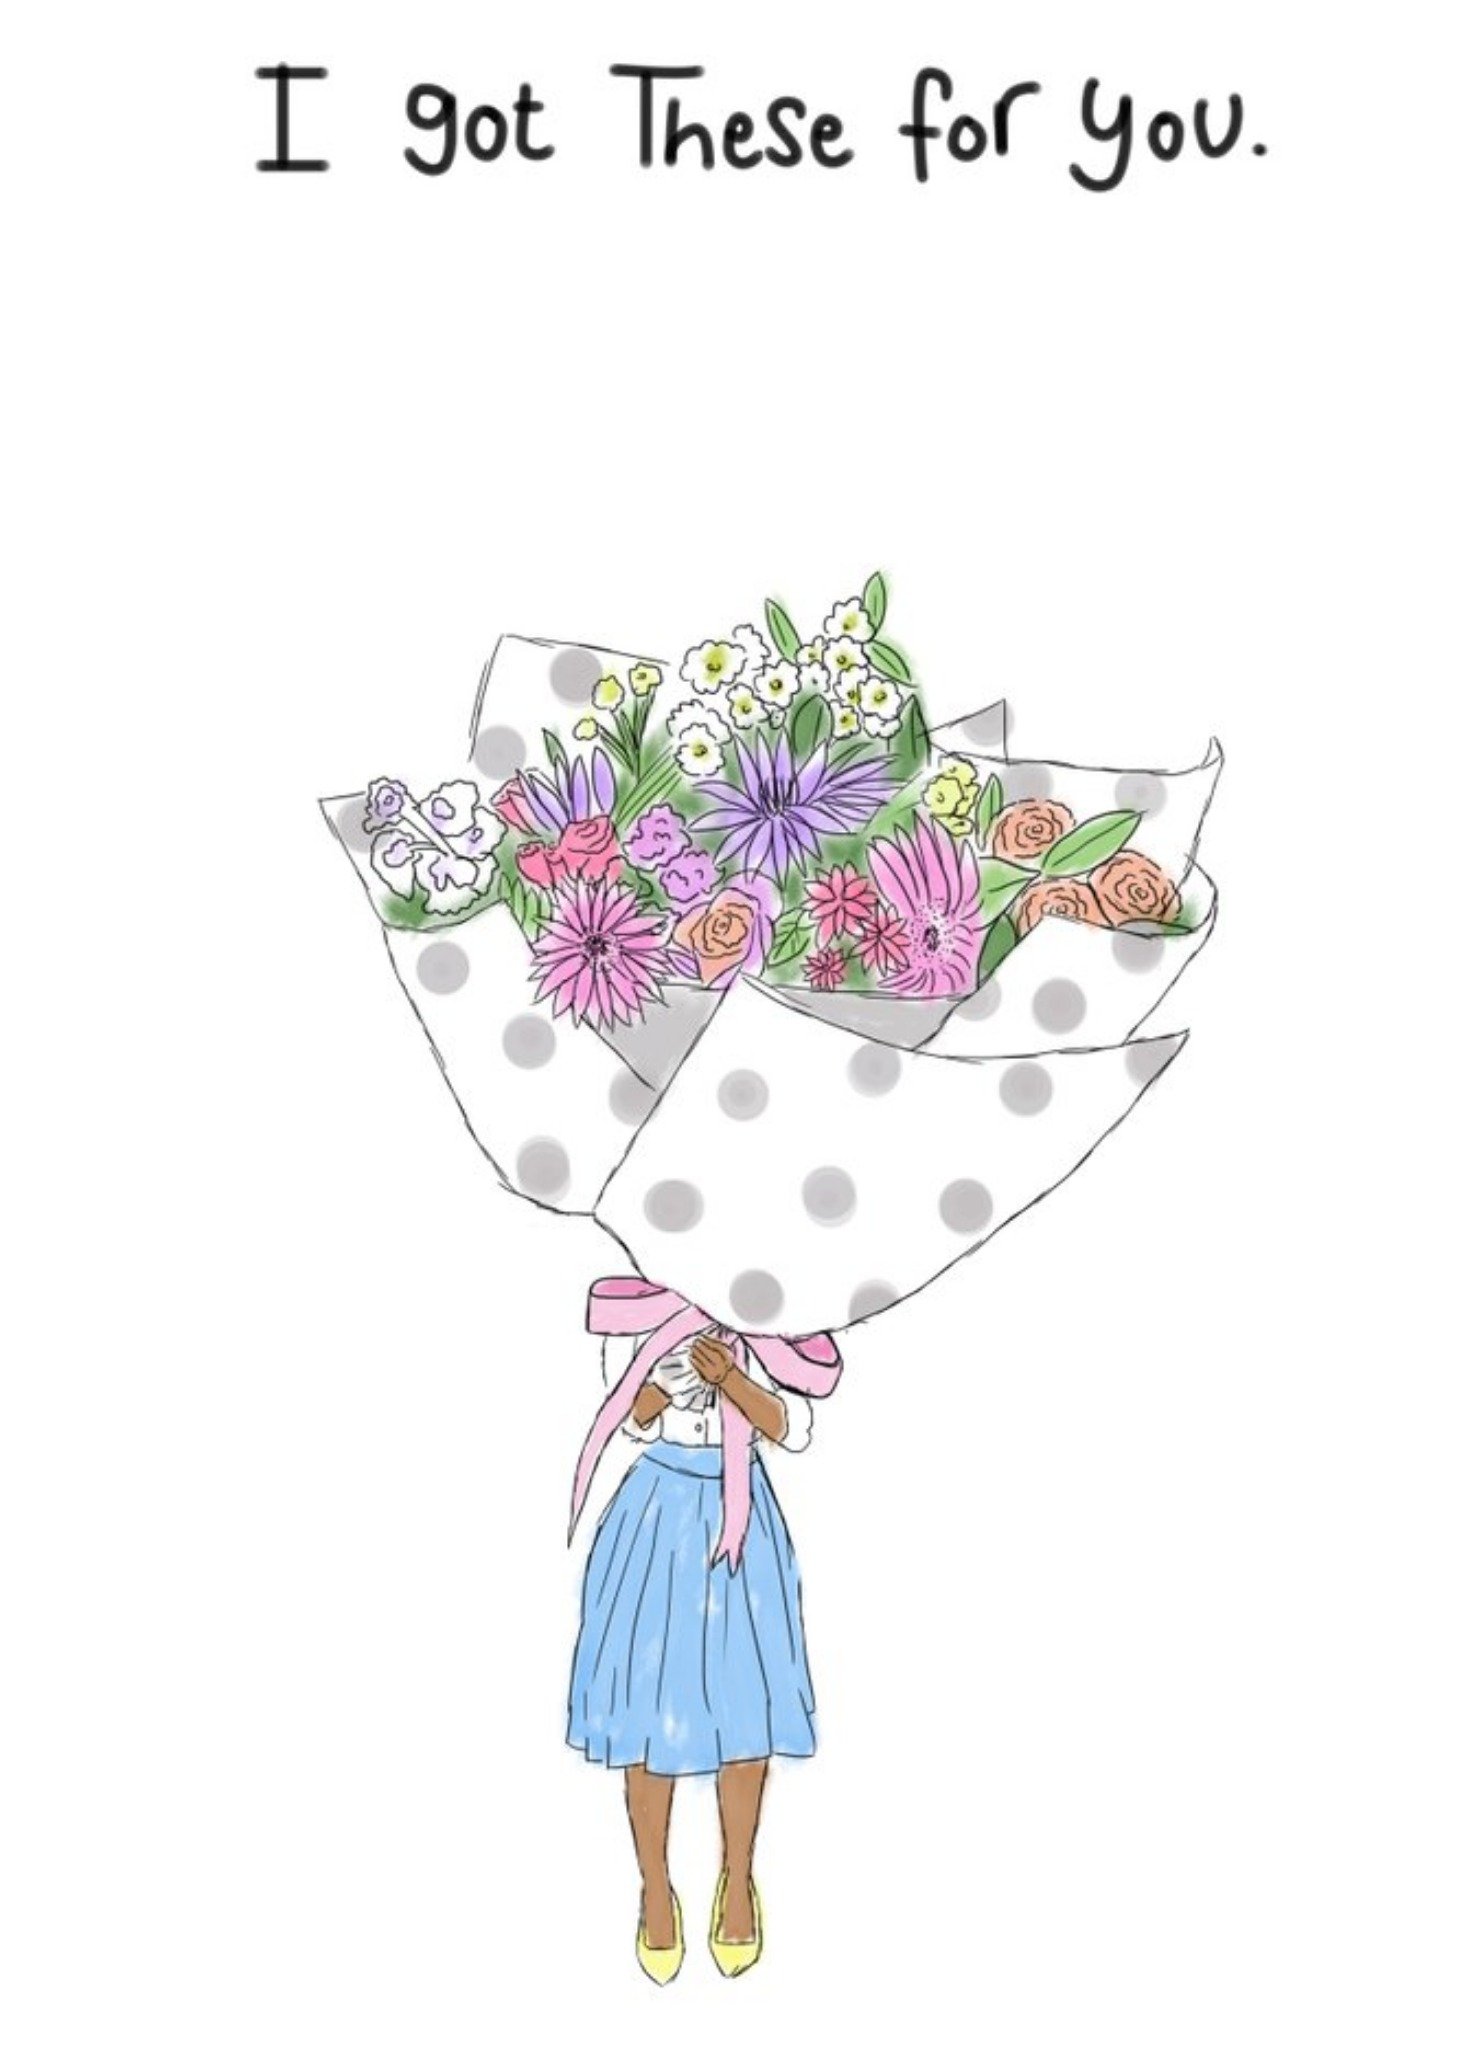 Moonpig Illustration Of A Woman With A Large Bouquet Of Flowers Thinking Of You Card Ecard